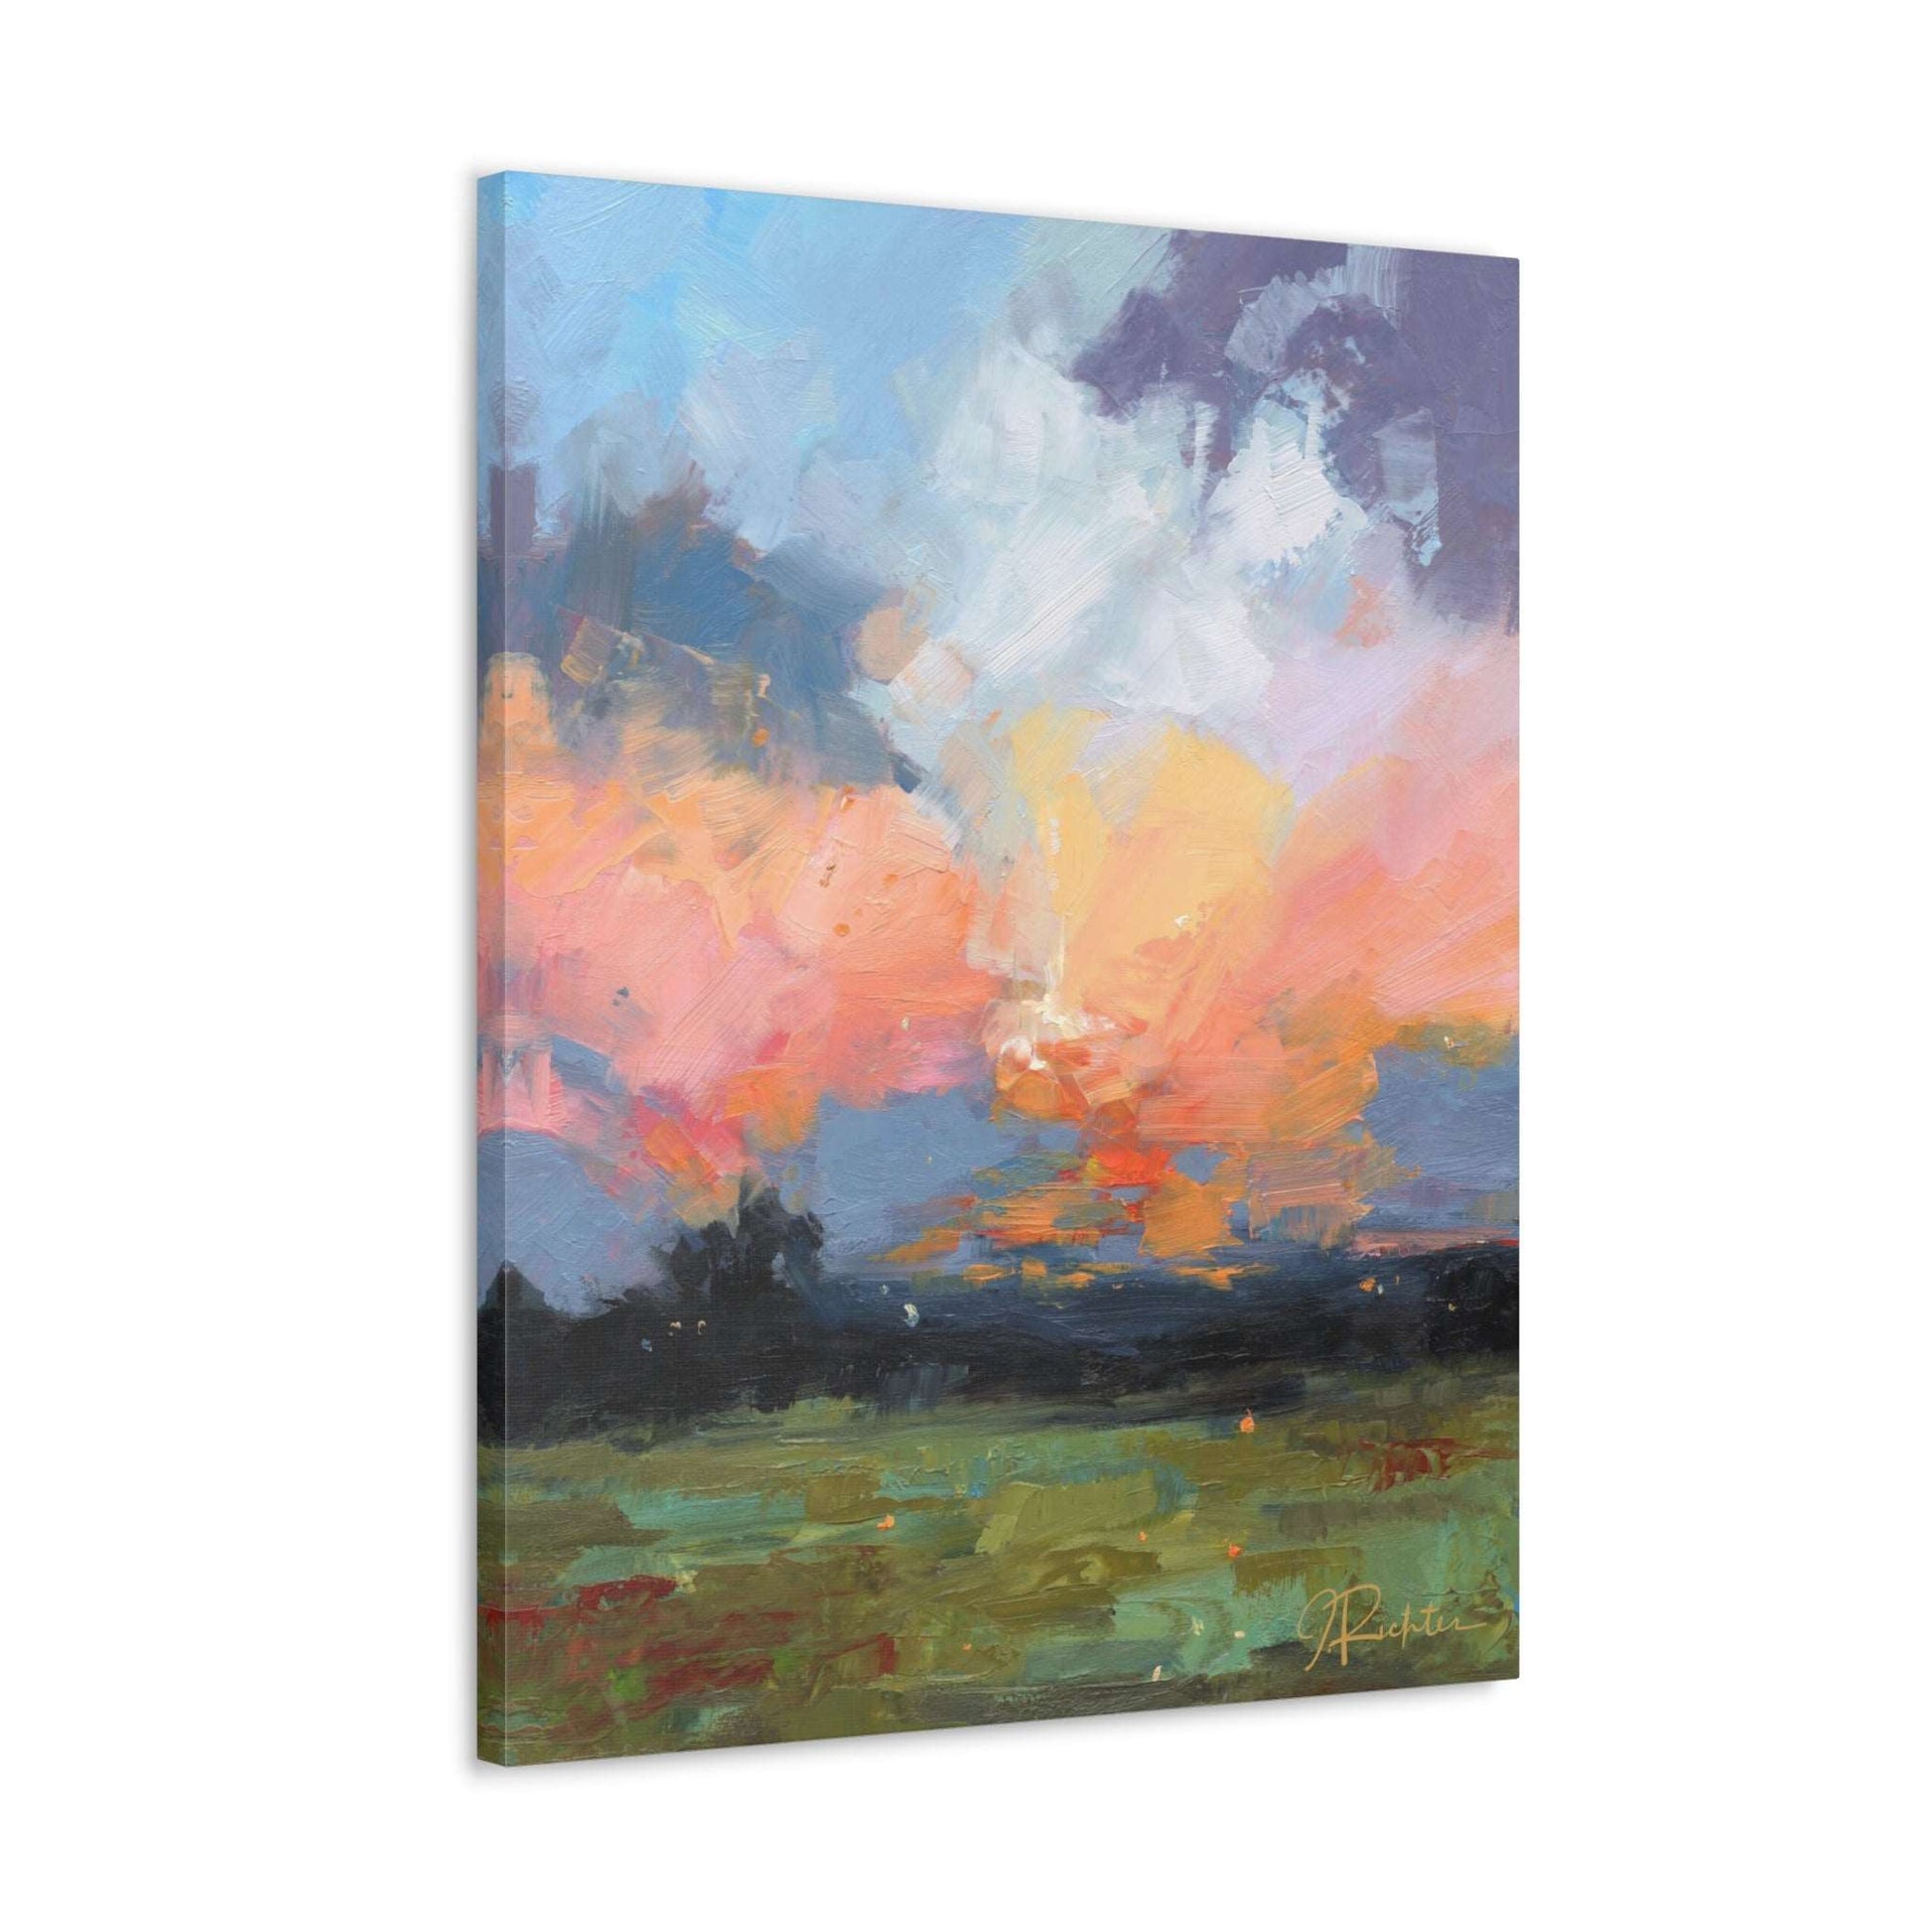 abstract landscape art with blue sky and bright peach clouds with dark trees and grass by Jessica Richter